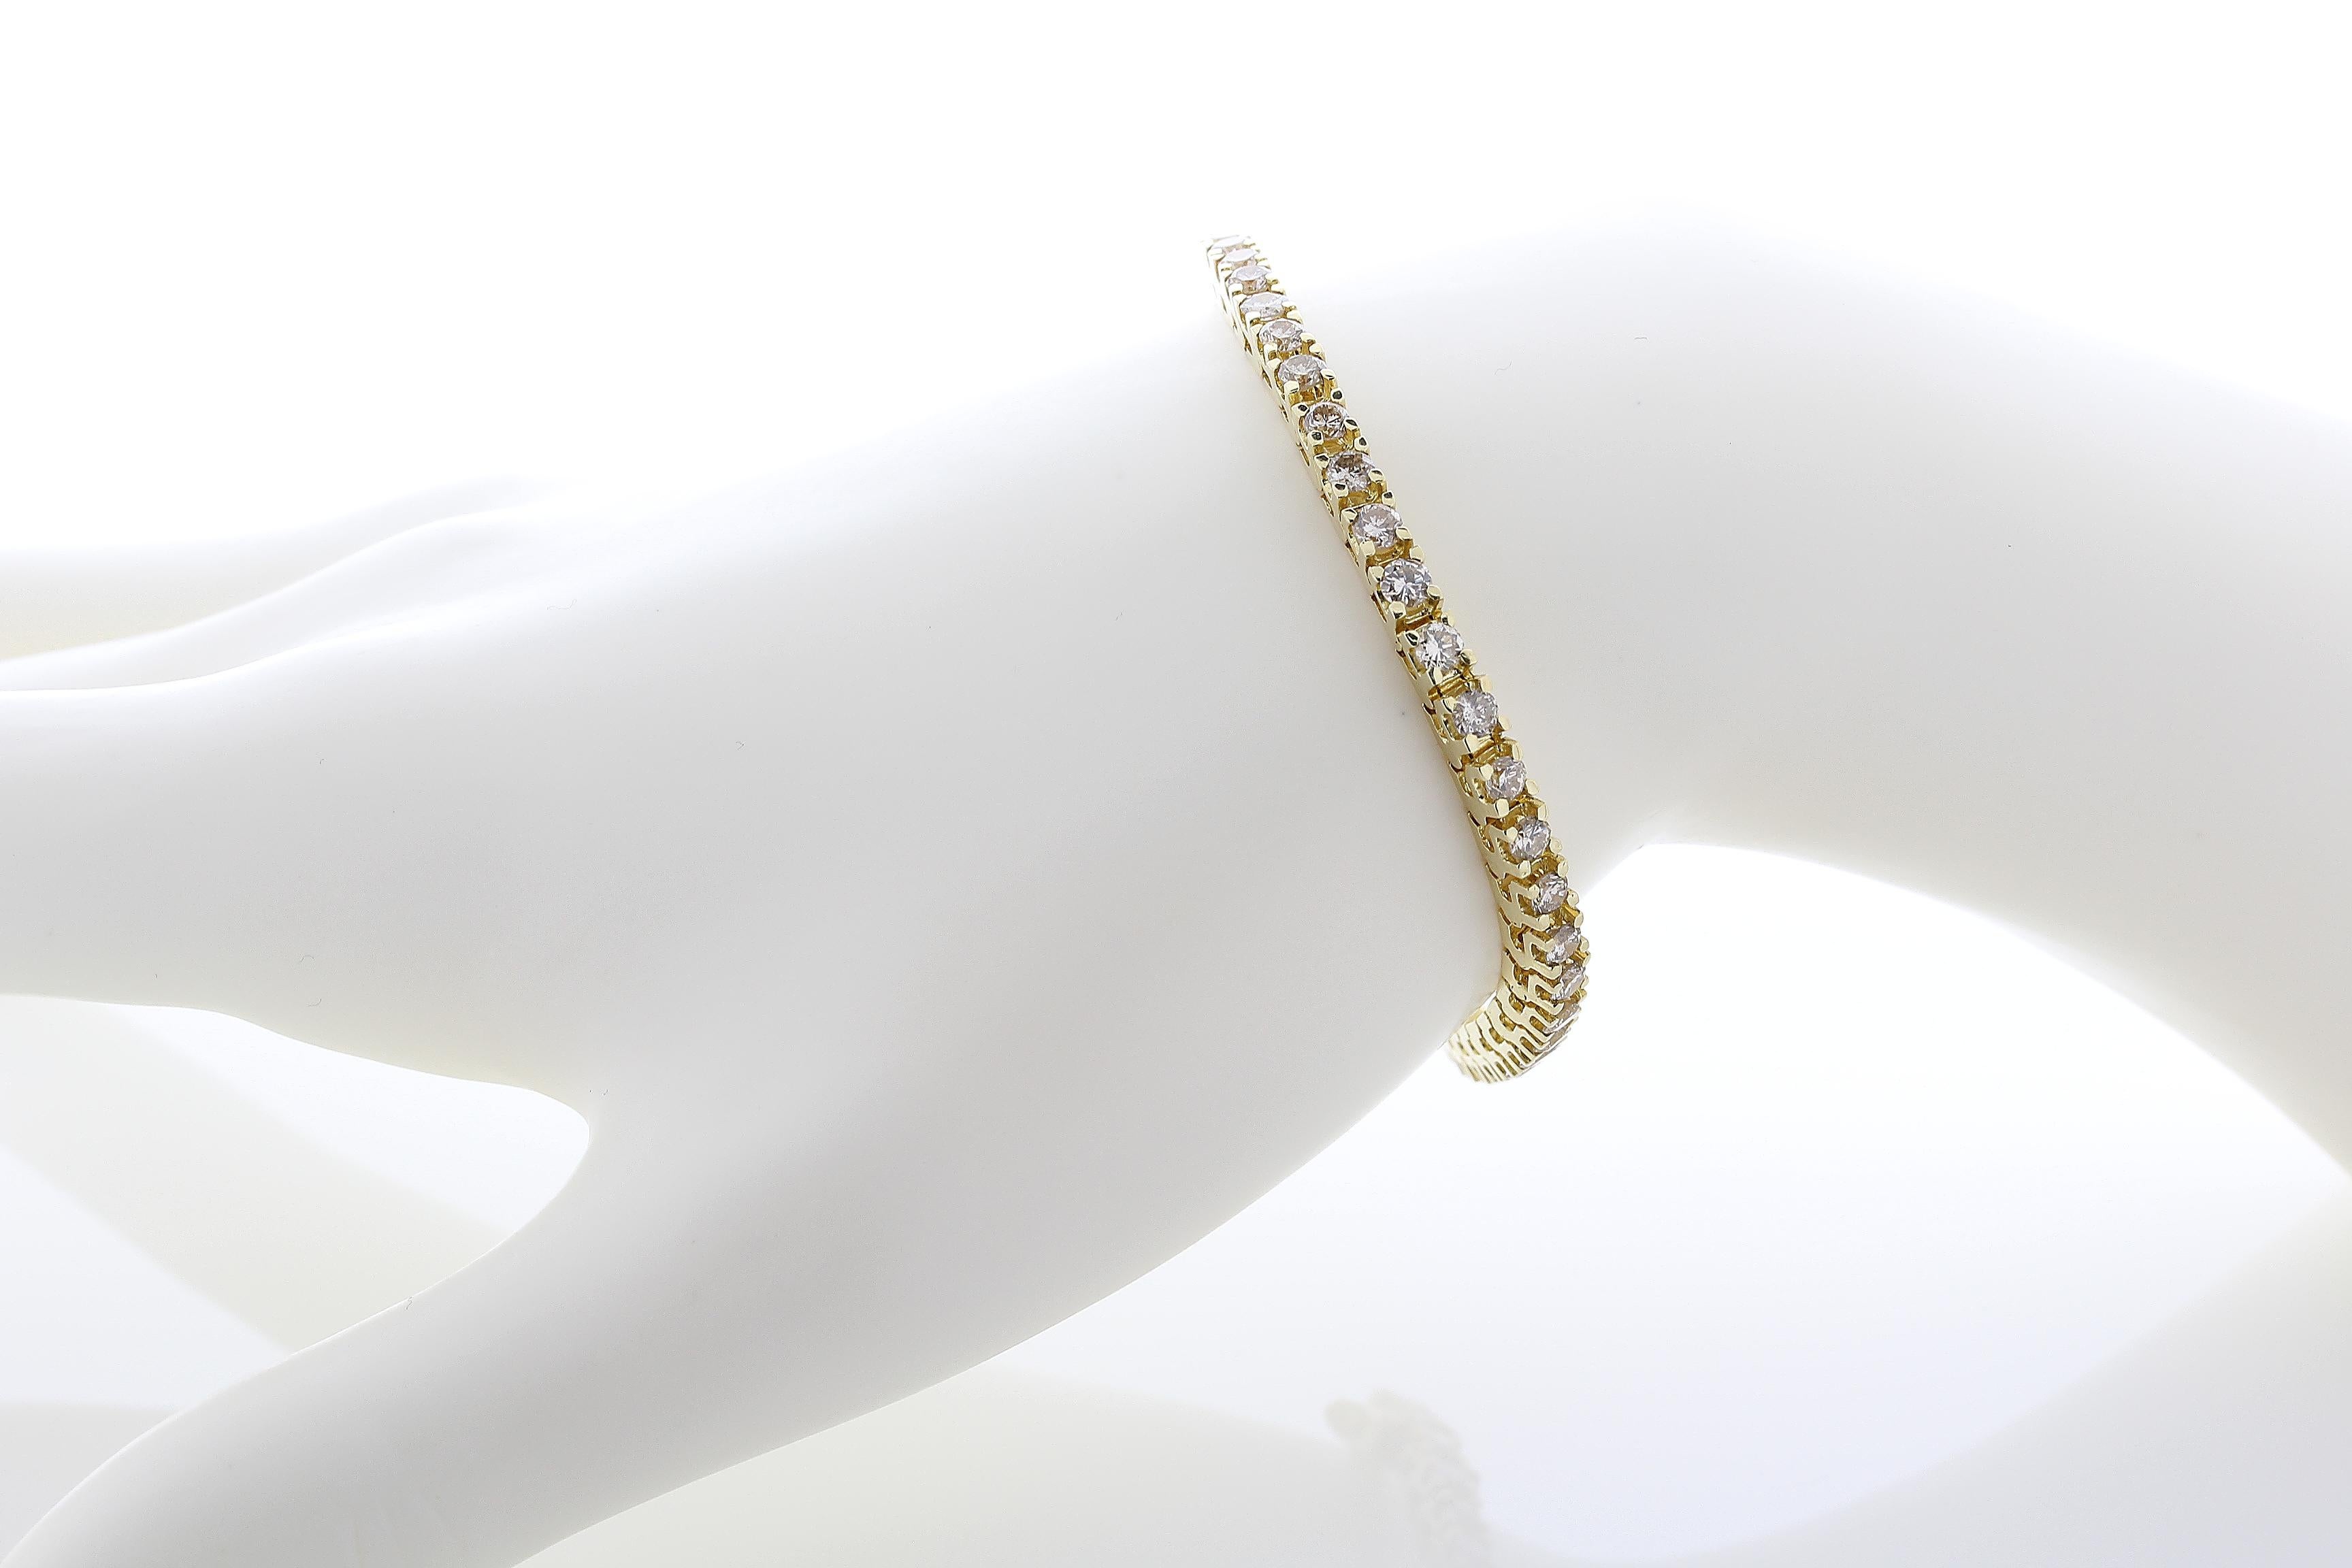 Incredible Deal on 4.00 Carat Total Weight Round Brilliant Shape Diamond Tennis Bracelet, 
This beautiful Natural Diamonds Tennis Bracelet is set in a 14 Karat Yellow Gold Mounting.
The bracelet holds 50 natural round diamonds in a prong setting,